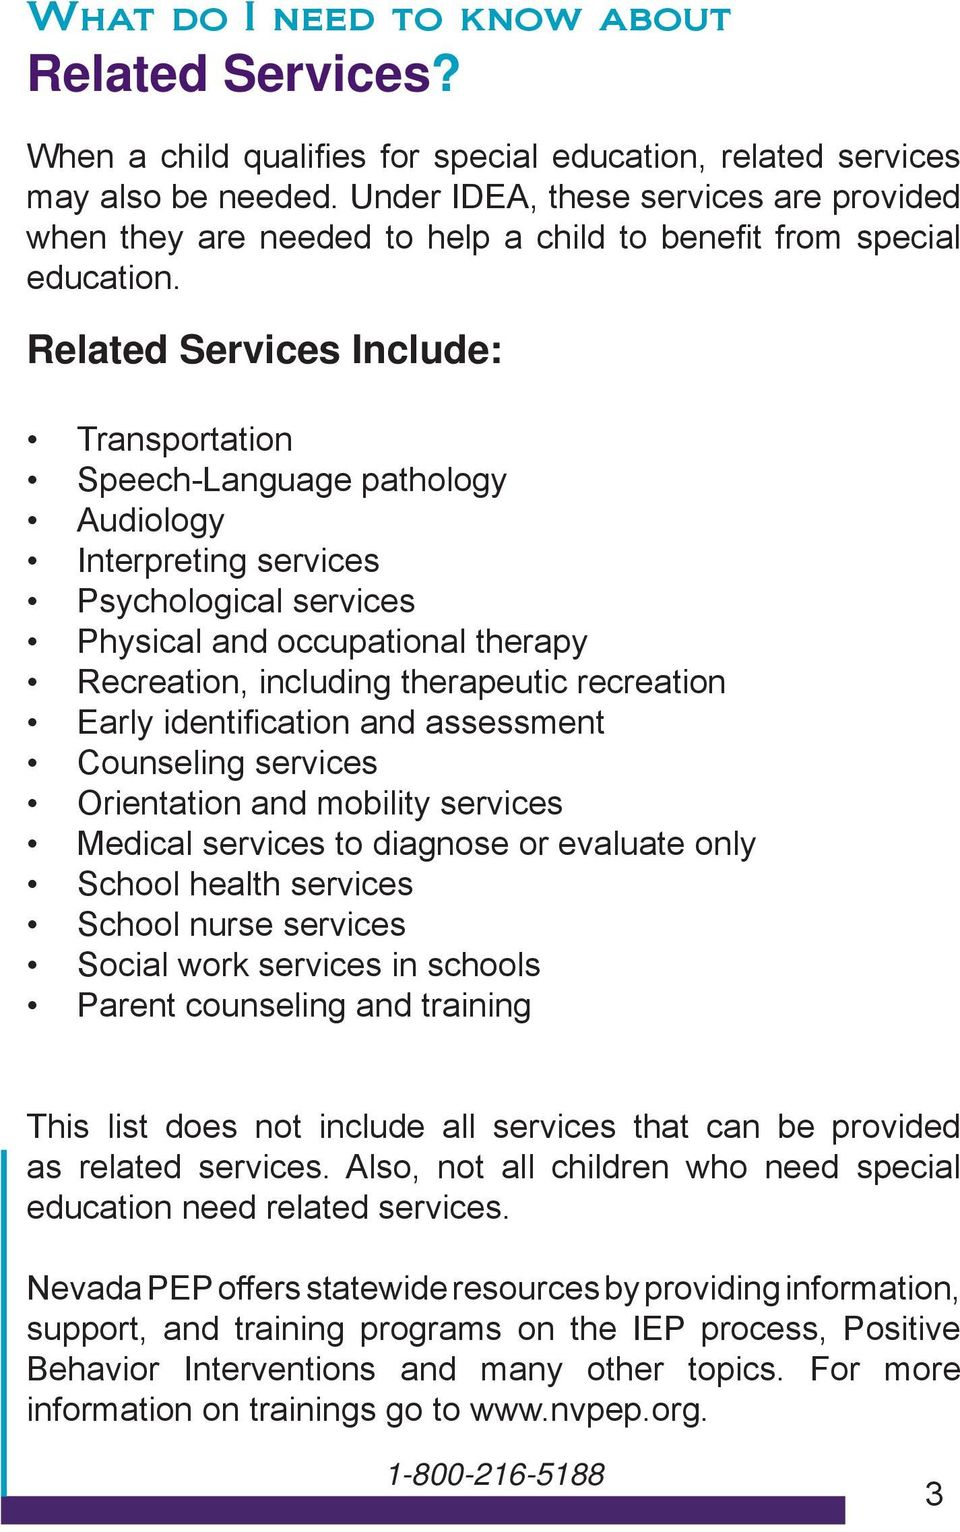 Related Services Include: Transportation Speech-Language pathology Audiology Interpreting services Psychological services Physical and occupational therapy Recreation, including therapeutic